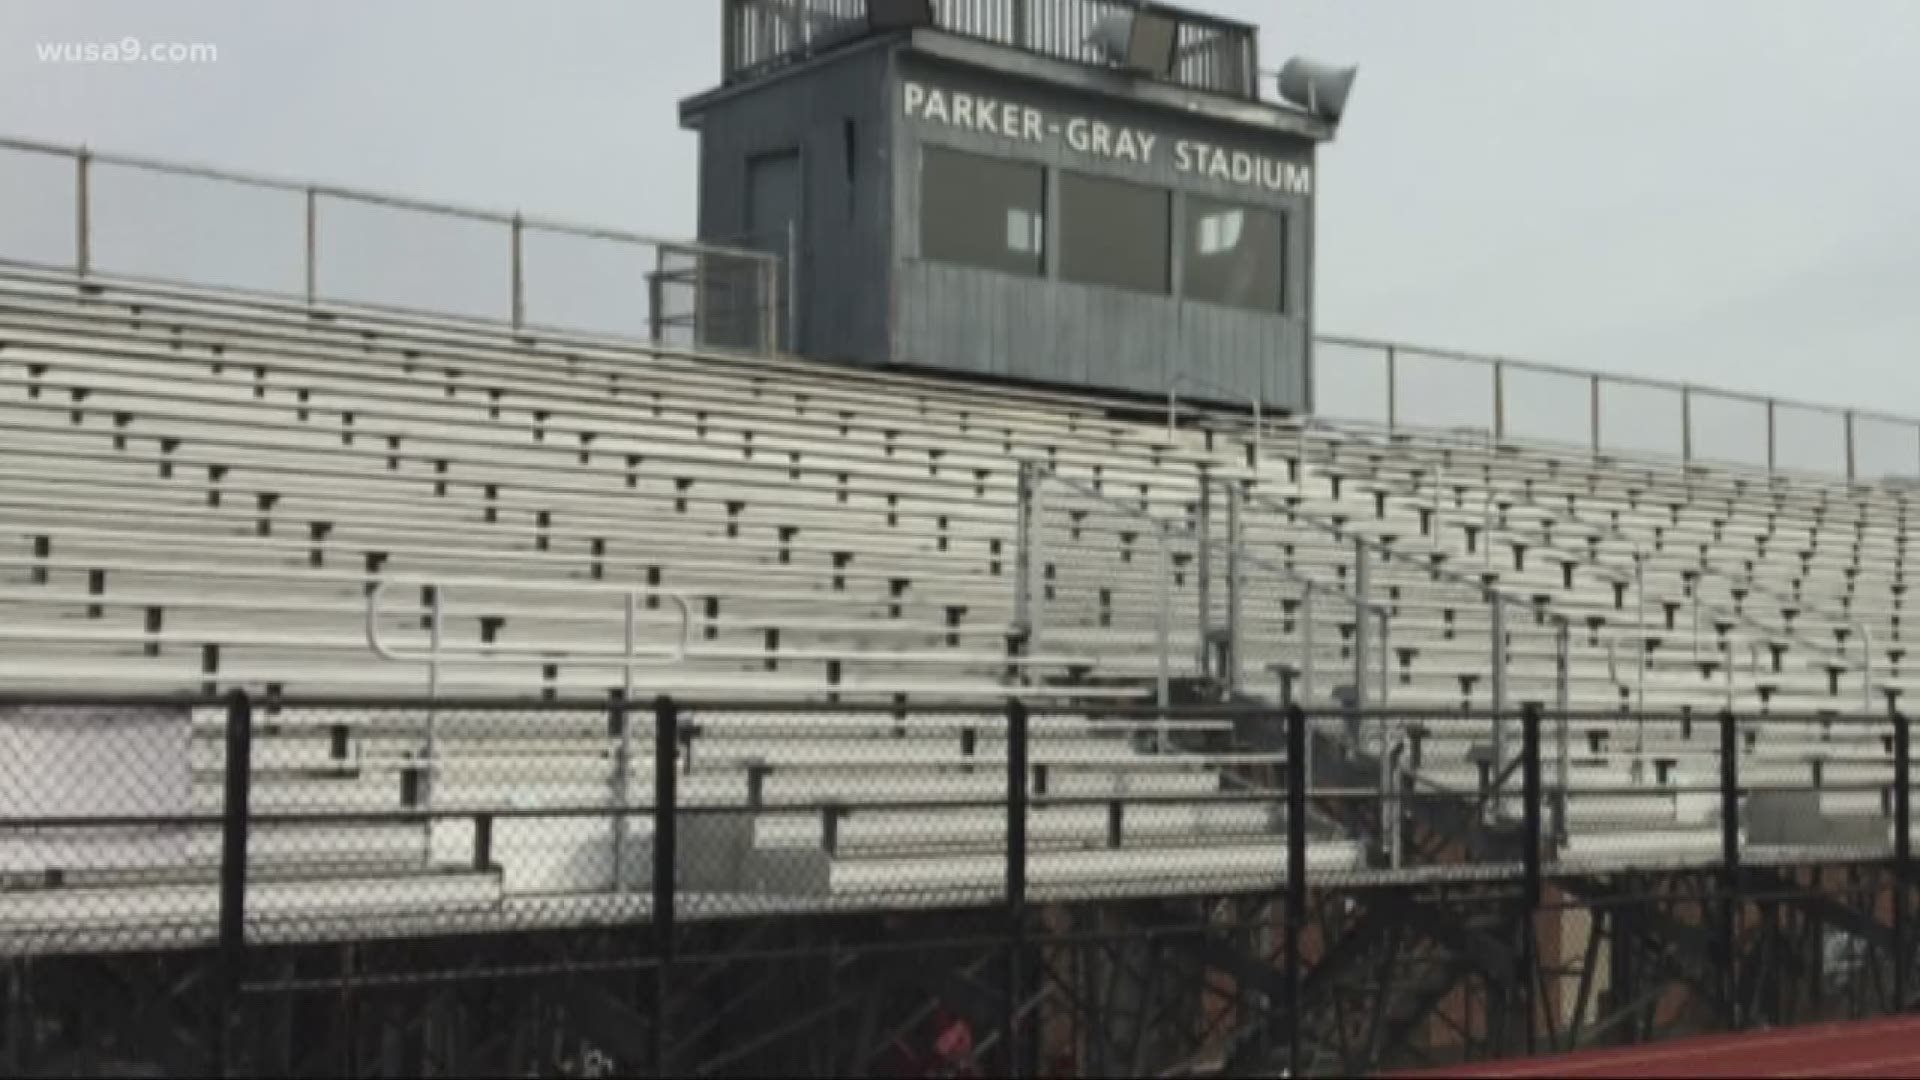 The school's stadium needs to be renovated, but area residents don't want the school to install stadium lights